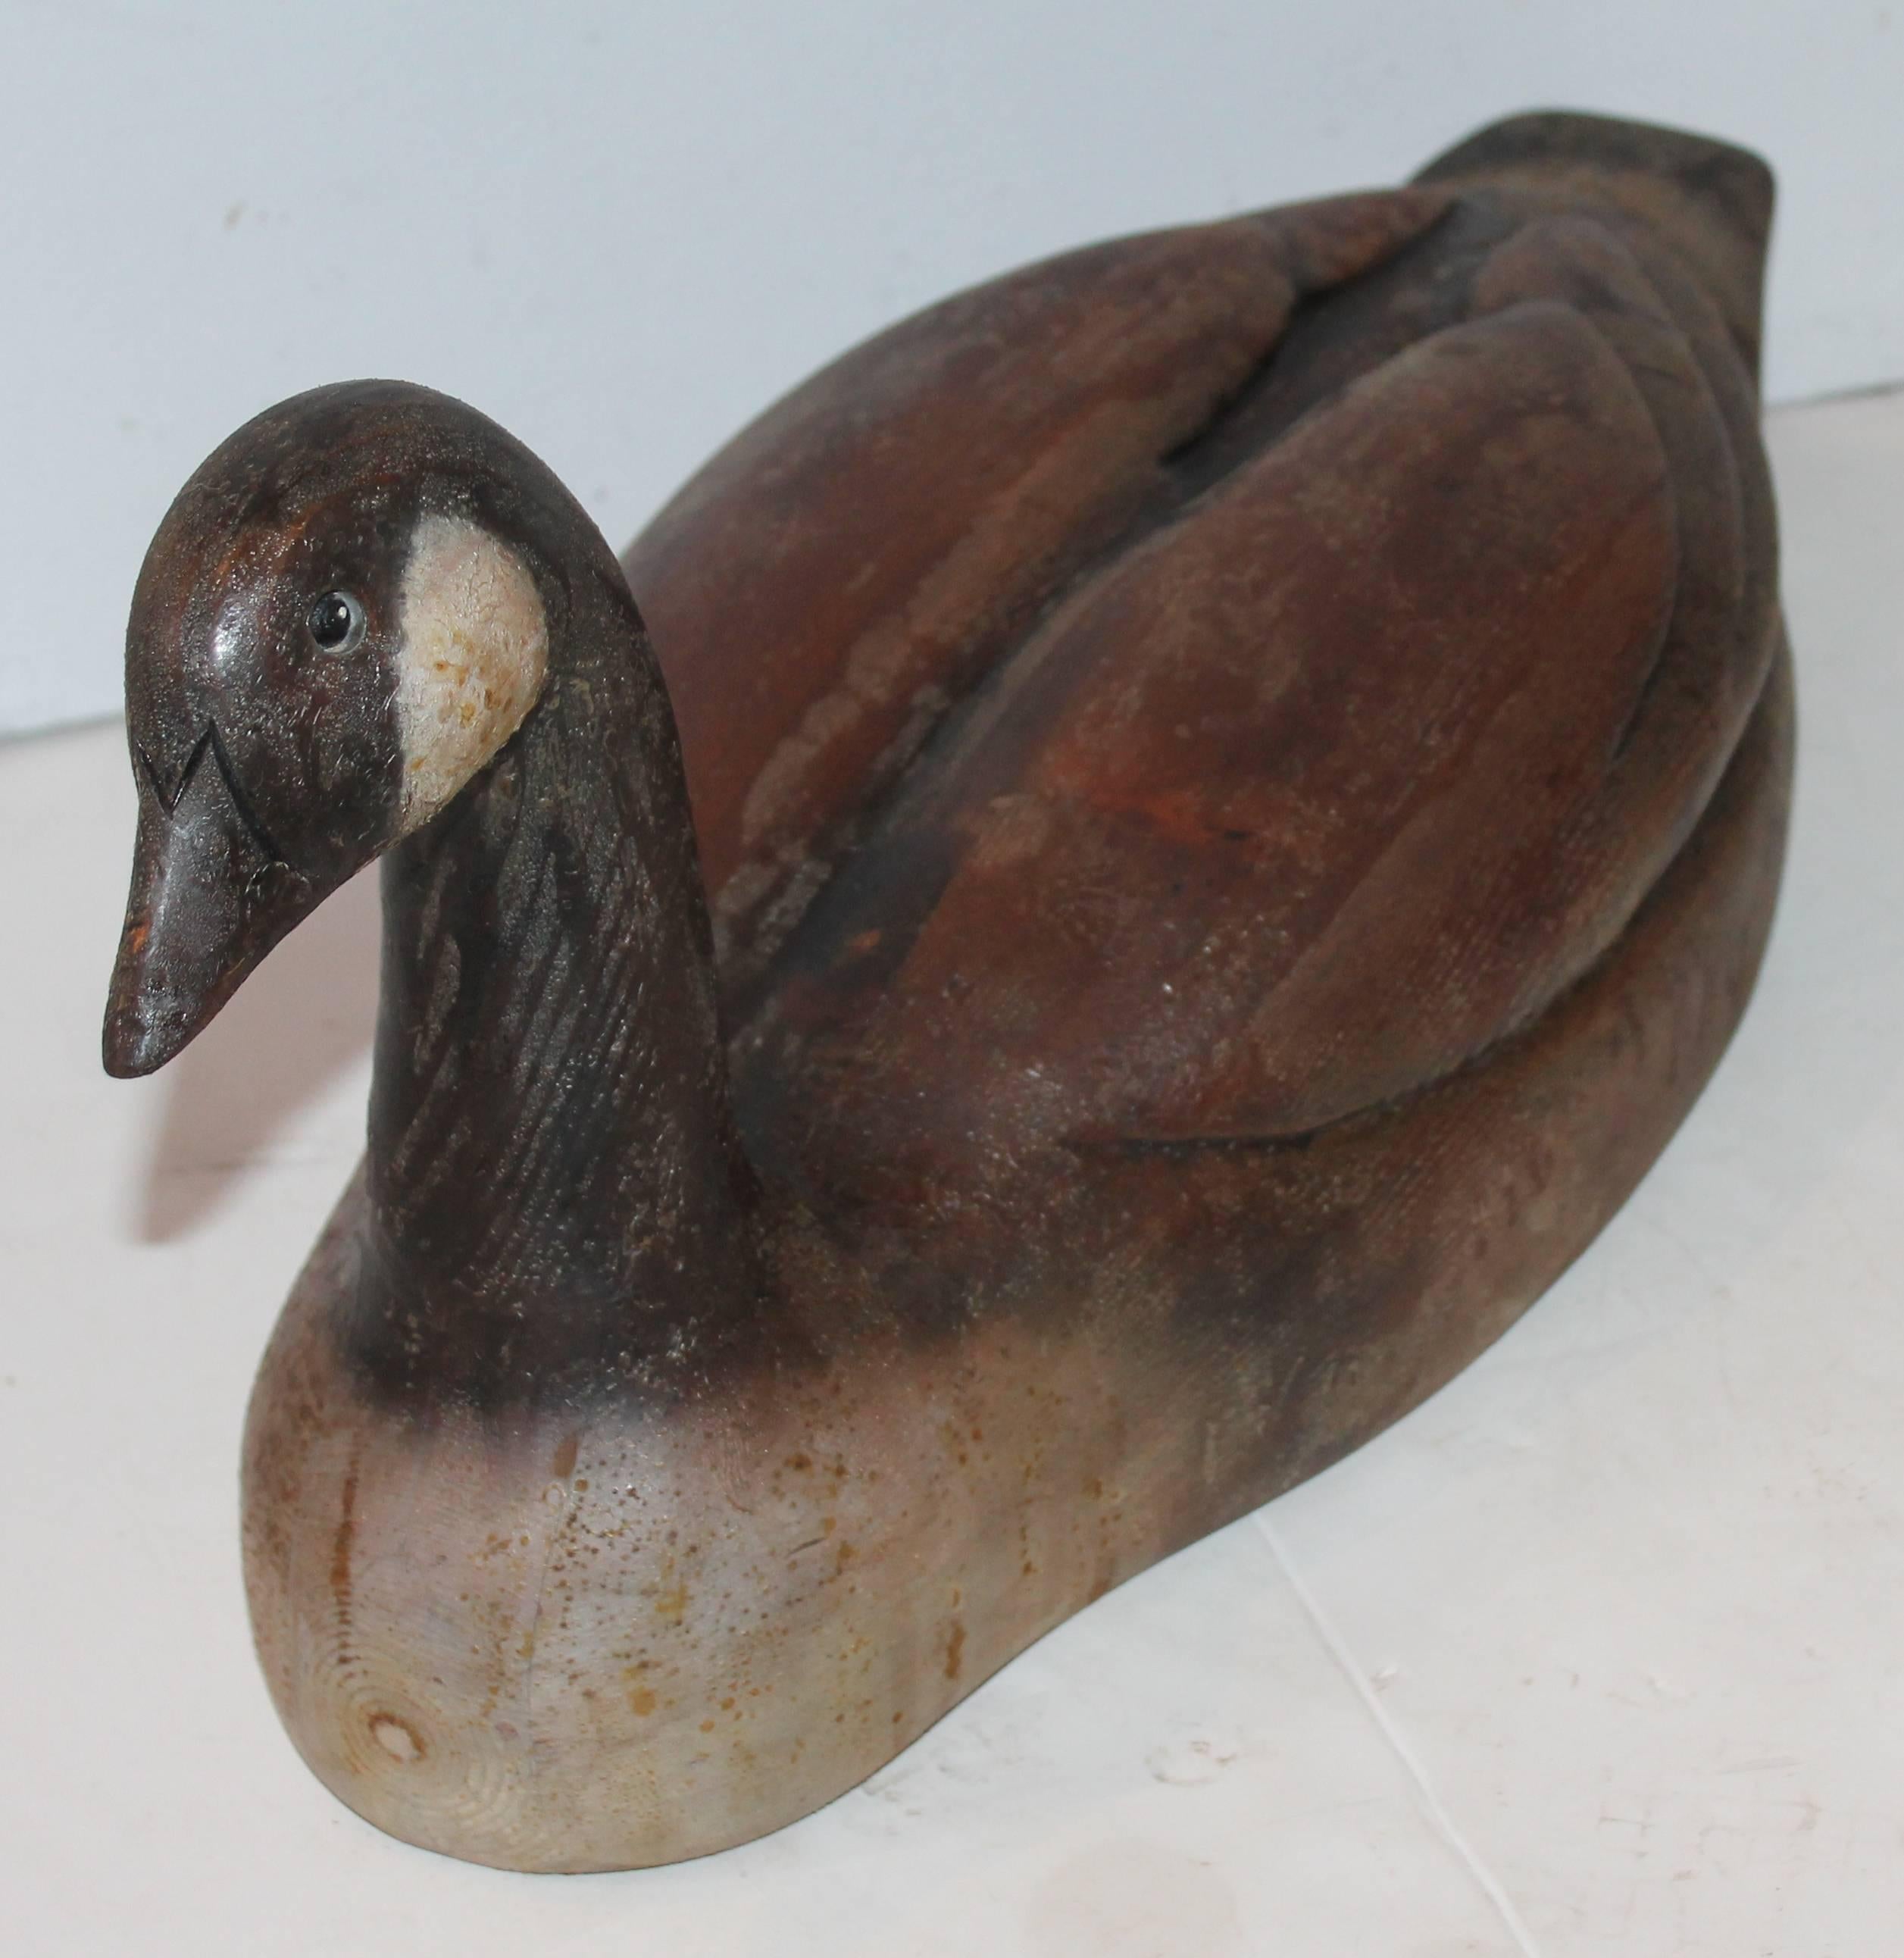 This fantastic decoy has such great form and paint. It is also signed by the by Cranford. It is a very heavy and well carved goose. Late but great! The condition is very good with minor wear and oxidation consistent with age and use. Possibly stored